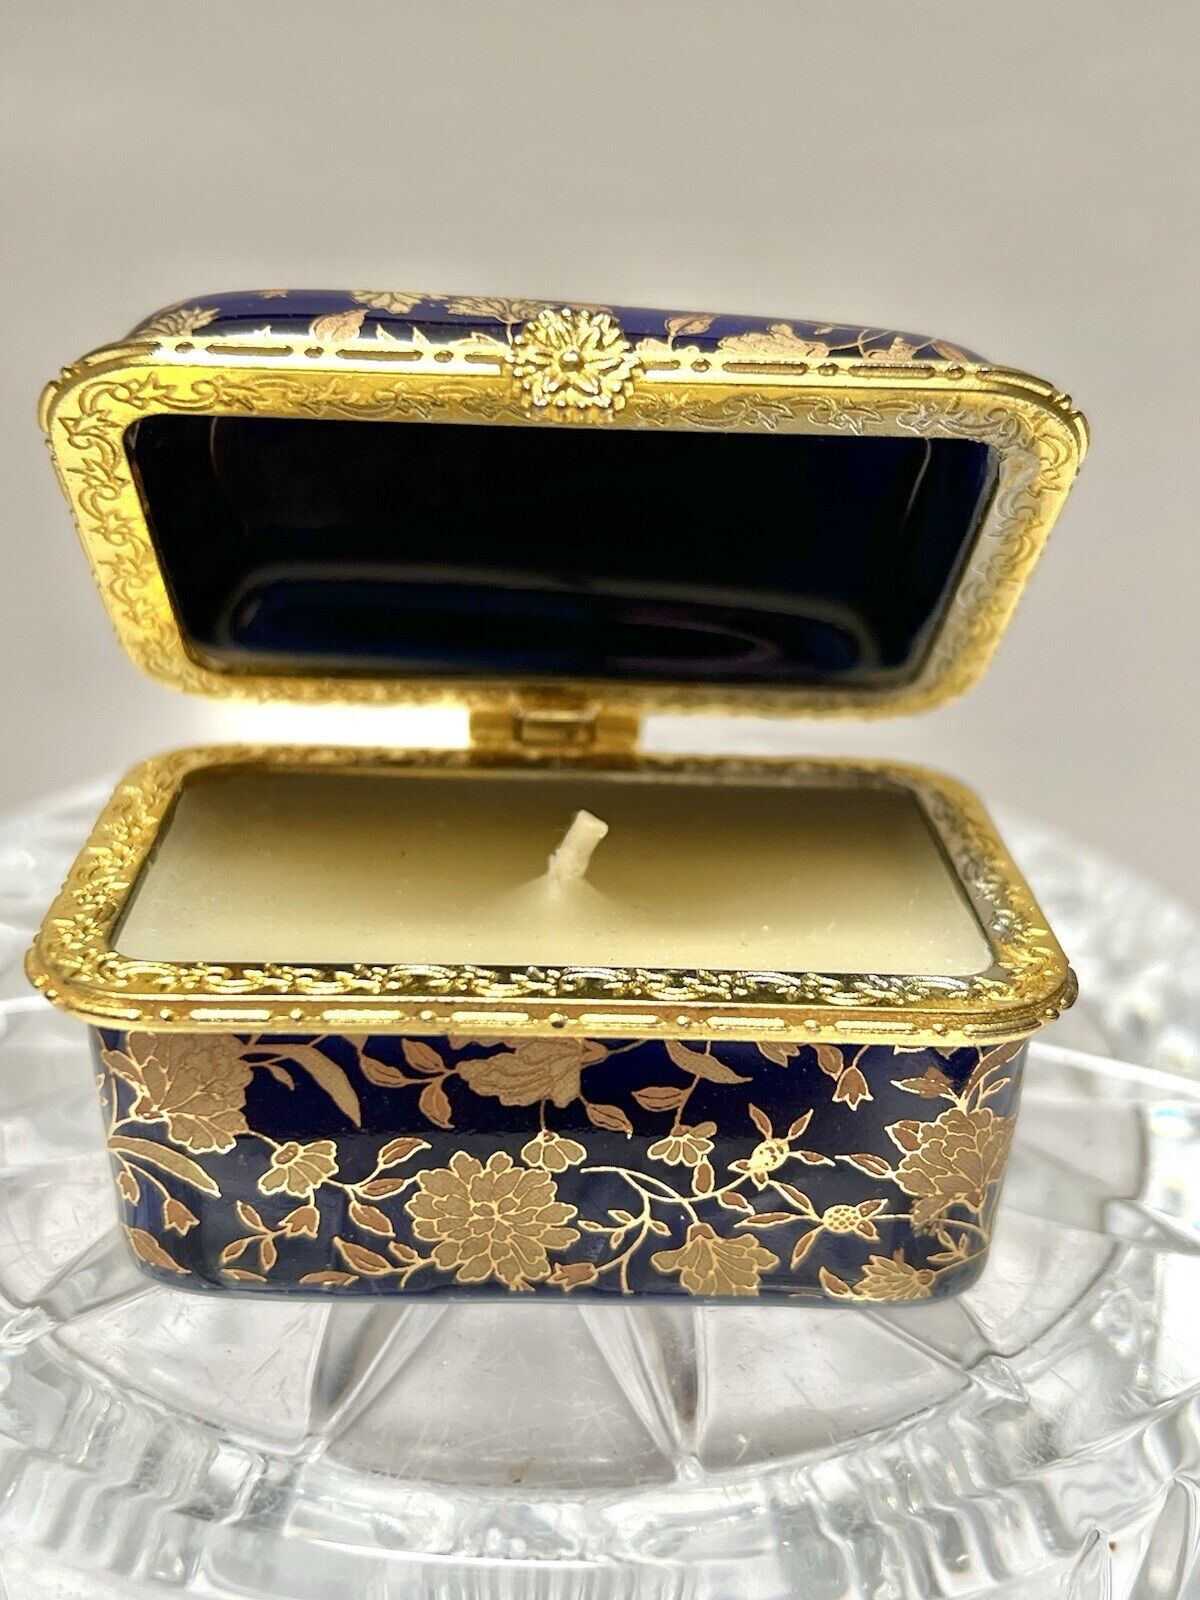 Trinket Box Cobalt Blue with Scented Candle, Gold Gilt Trim, Hinged Lid